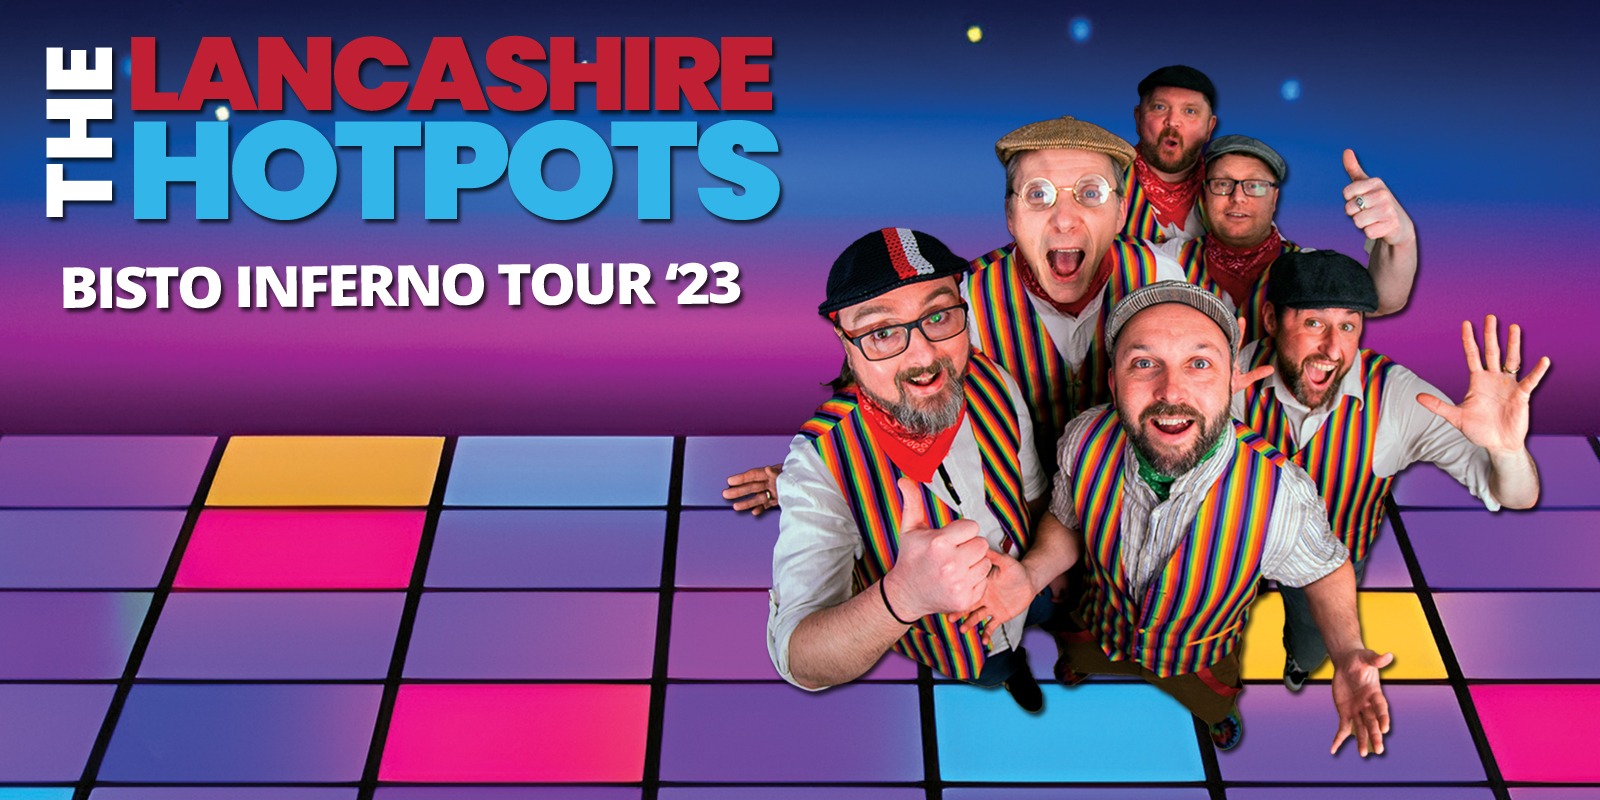 A promotional image of the Lancashire Hotpots for their 2023 Bisto Inferno tour dates